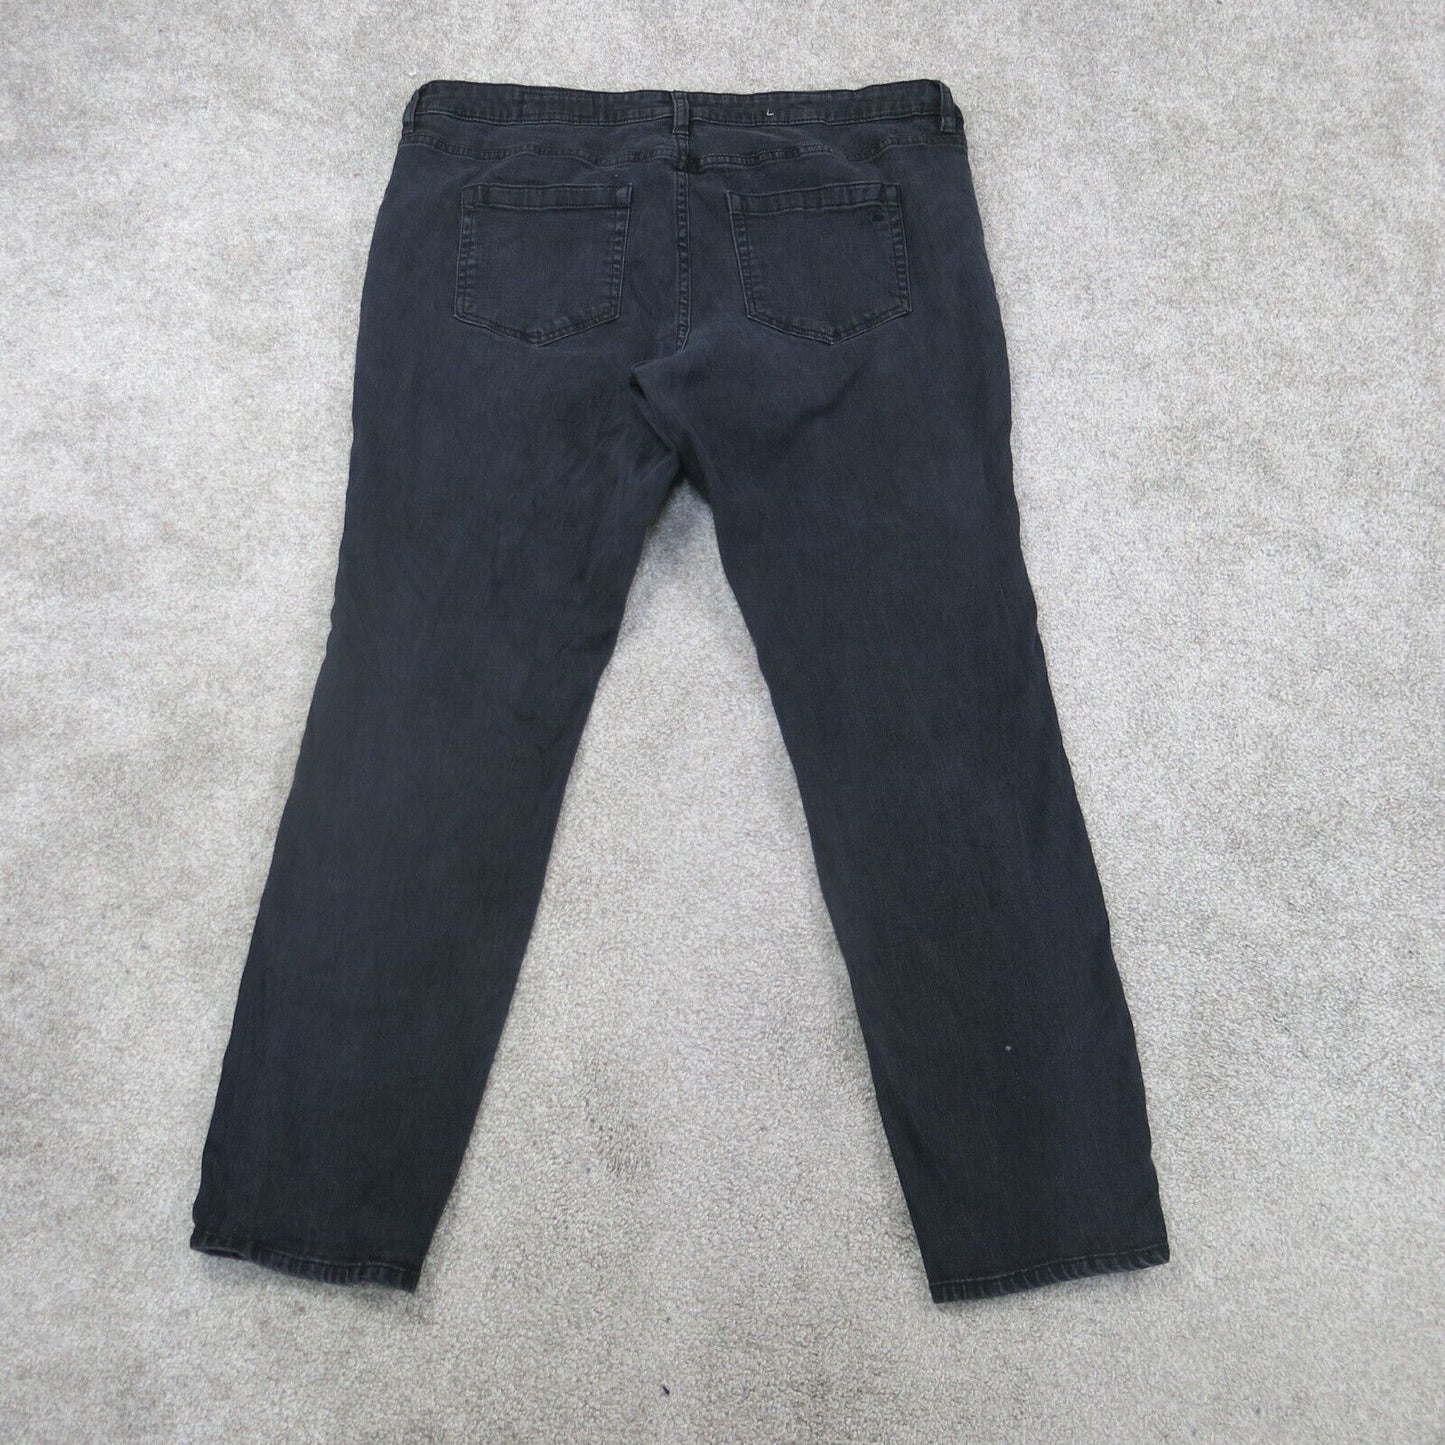 Vince Camuto Jeans Womens 18W Black Slim Straight Denim Stretch Casual Outdoors